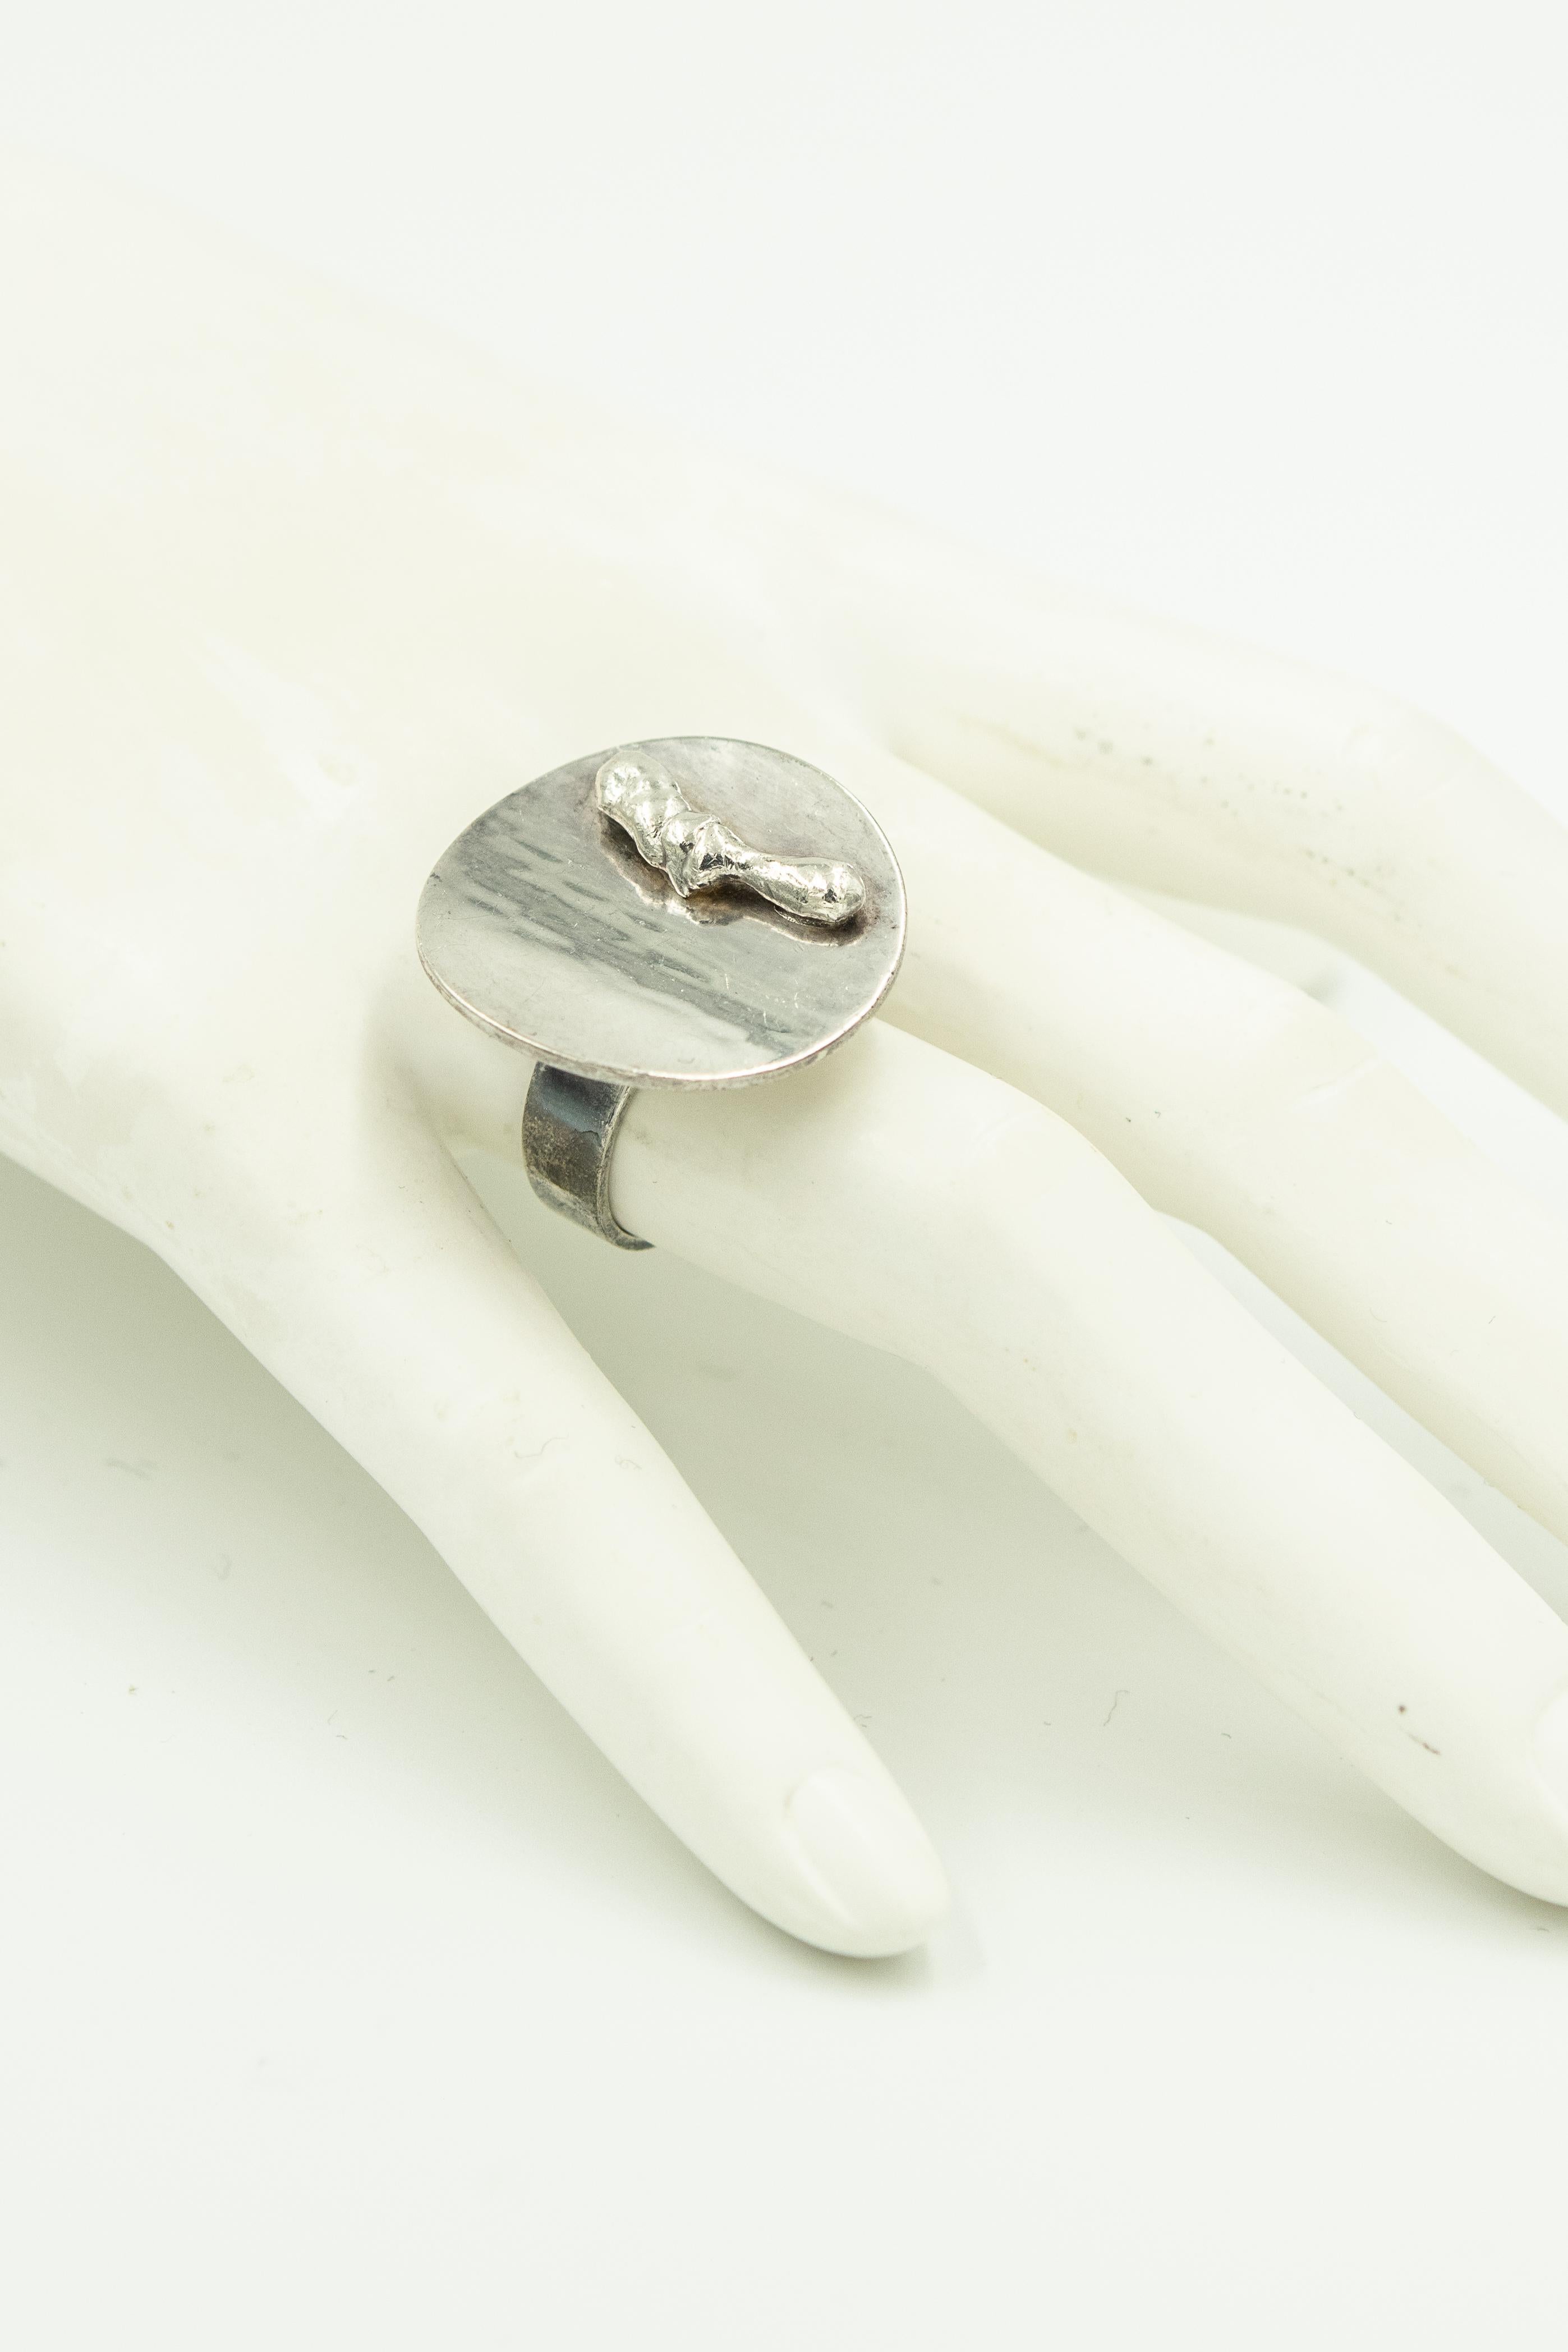 Danish Modernist Sculptural Ring with Hand Holding Flame Torch by Ib Bluitgen For Sale 2